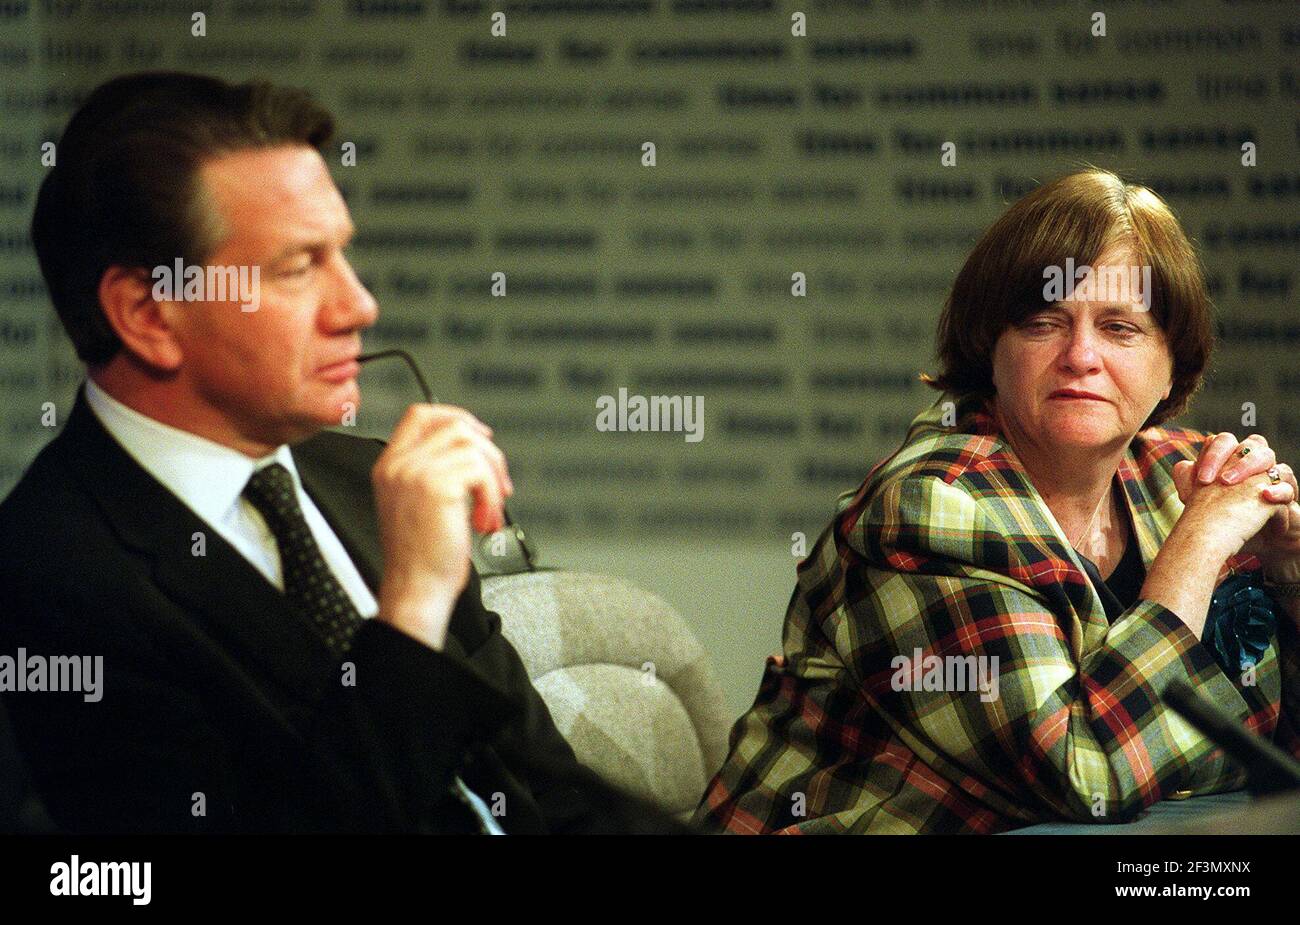 Shadow home secretary and conseRvative Anne Widdecombe gives shadow cghancelor Michael Portillo a strange look at this mornings press conference. Stock Photo